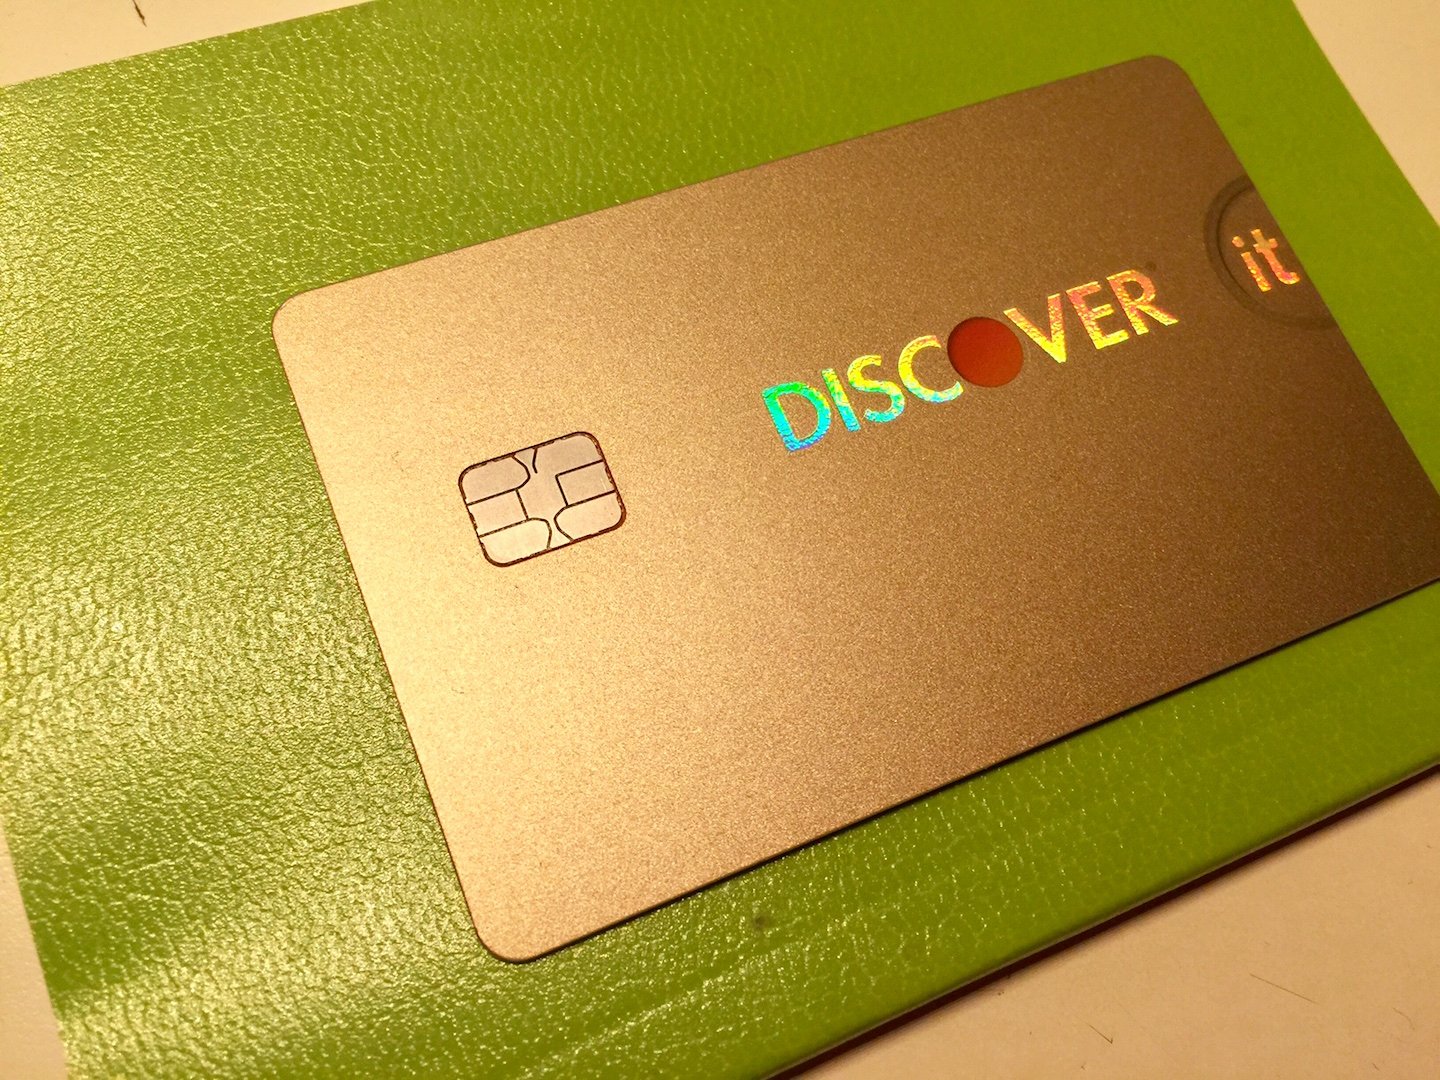 Discover Card Design Options Lovely New Discover Gold Design Updated with Pics Myfico forums